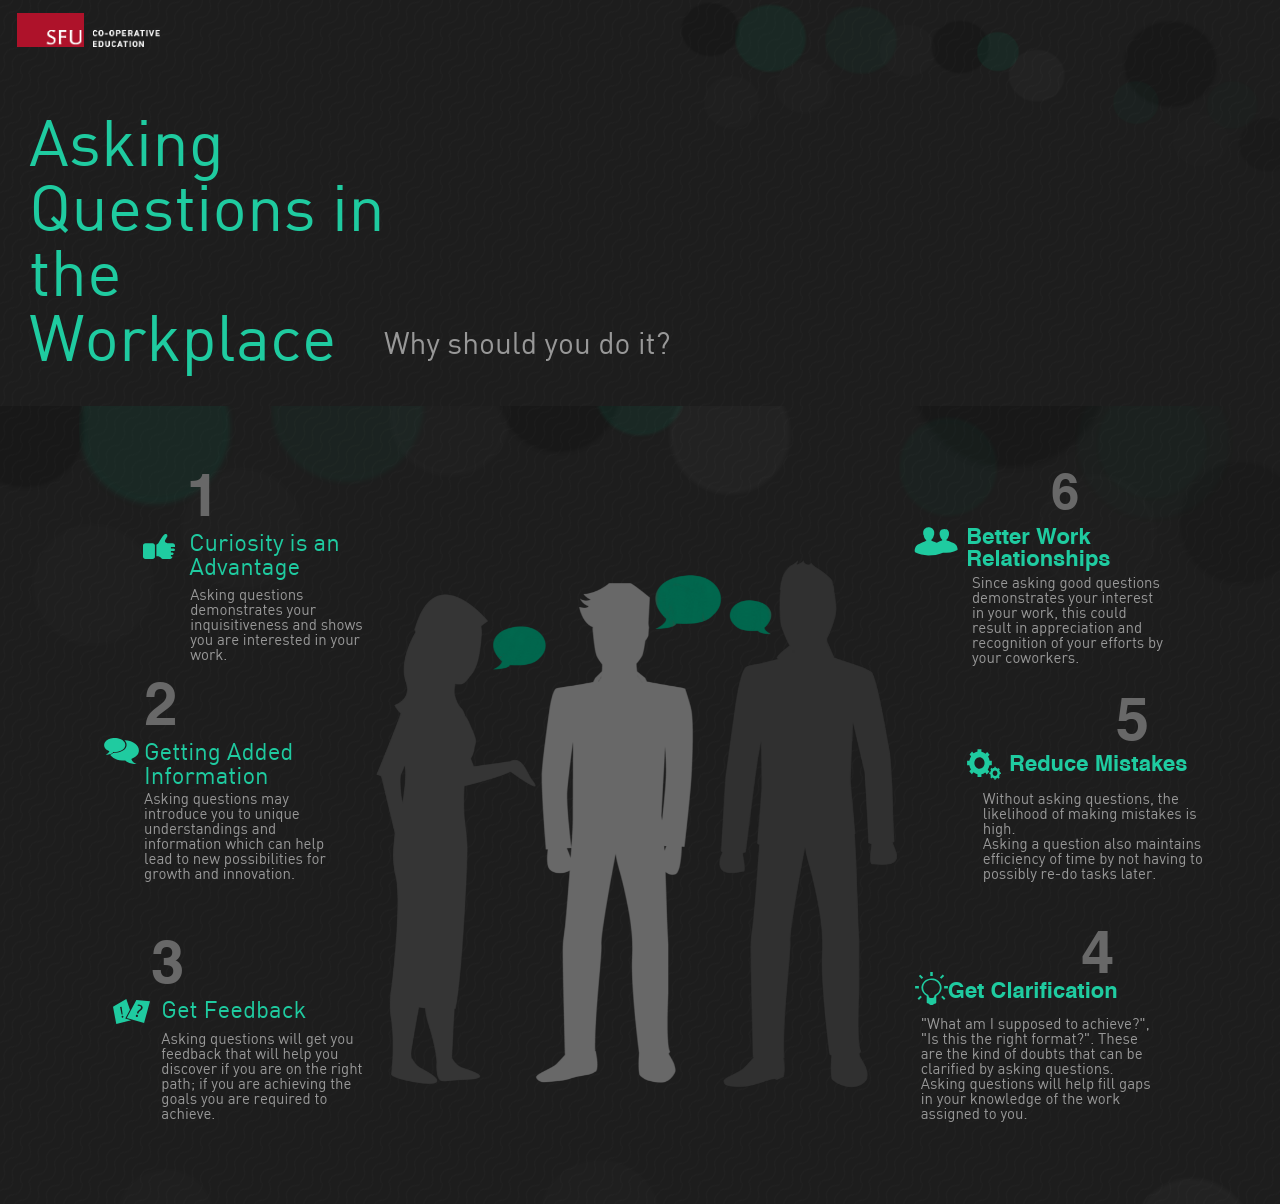 Asking Questions in the Workplace